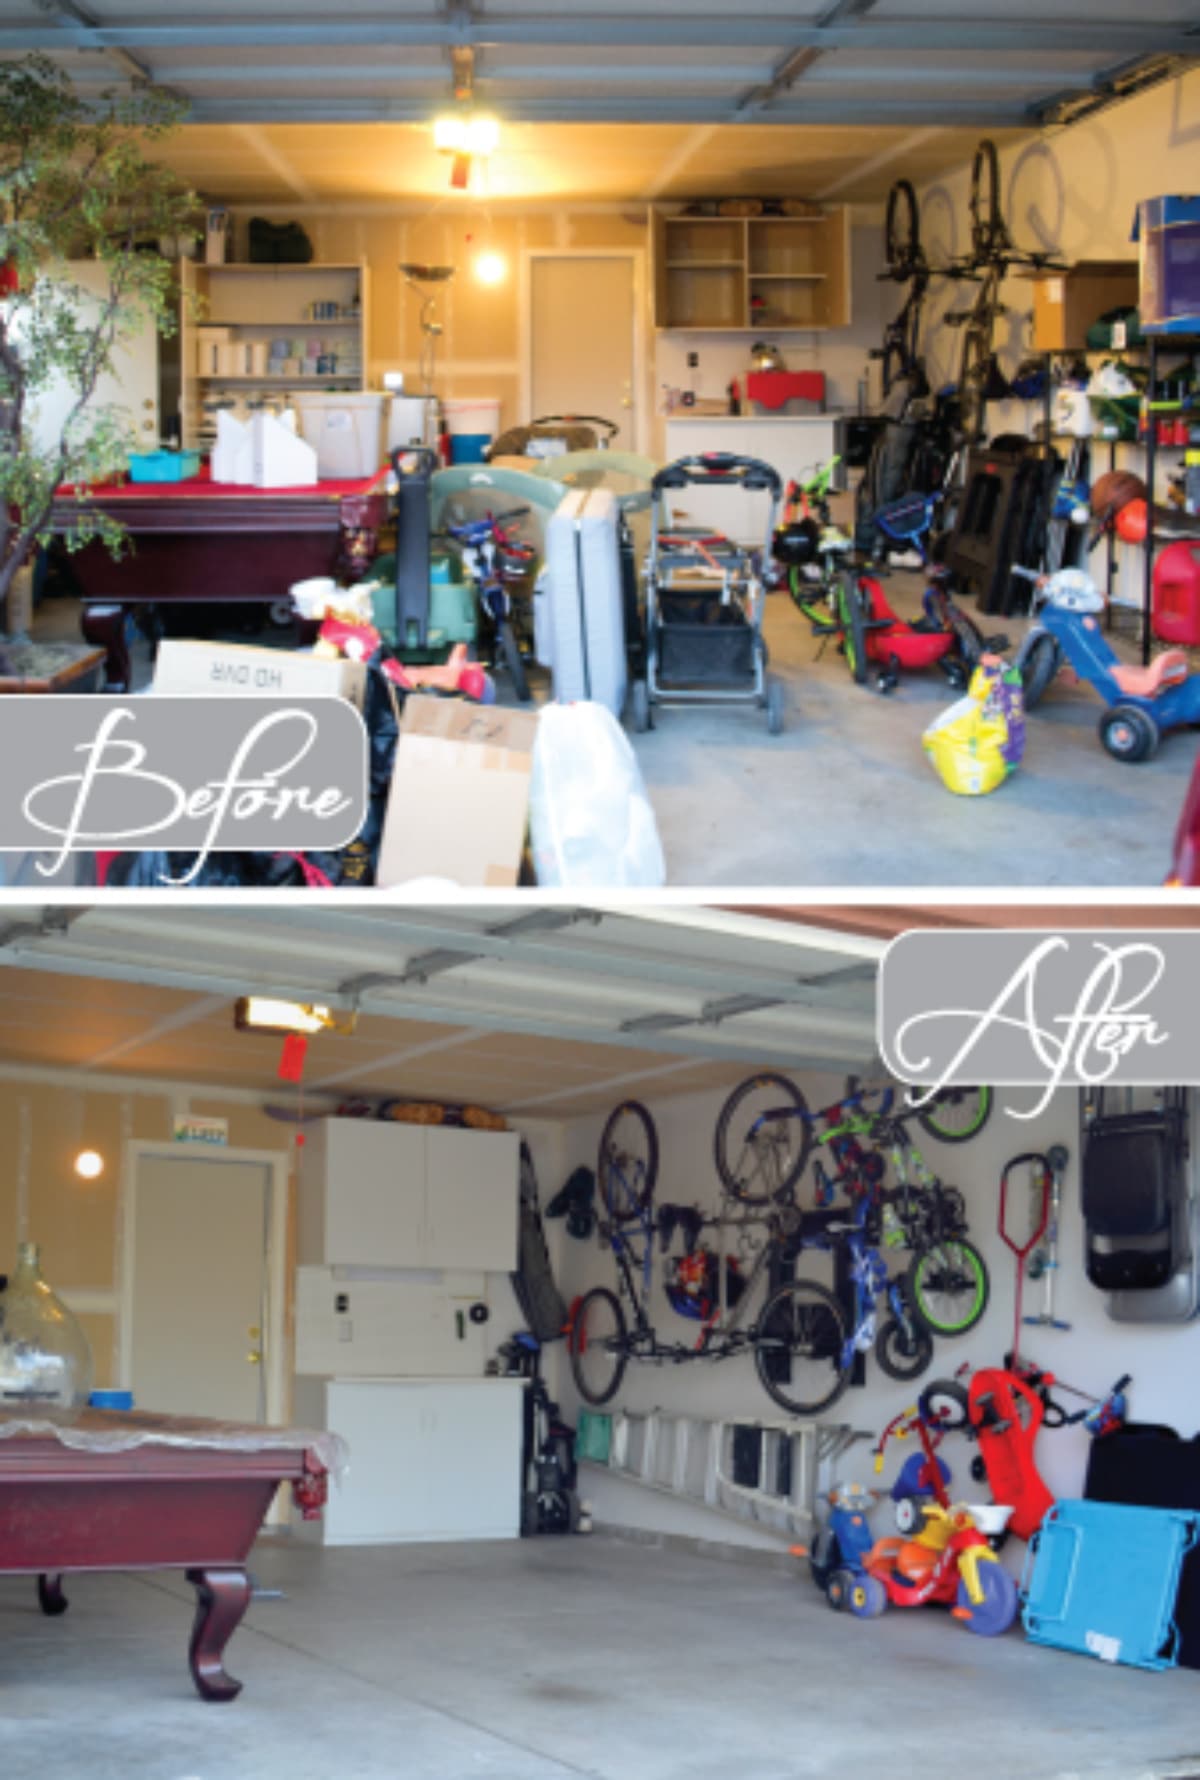 DIY hanging bike organization before and after.